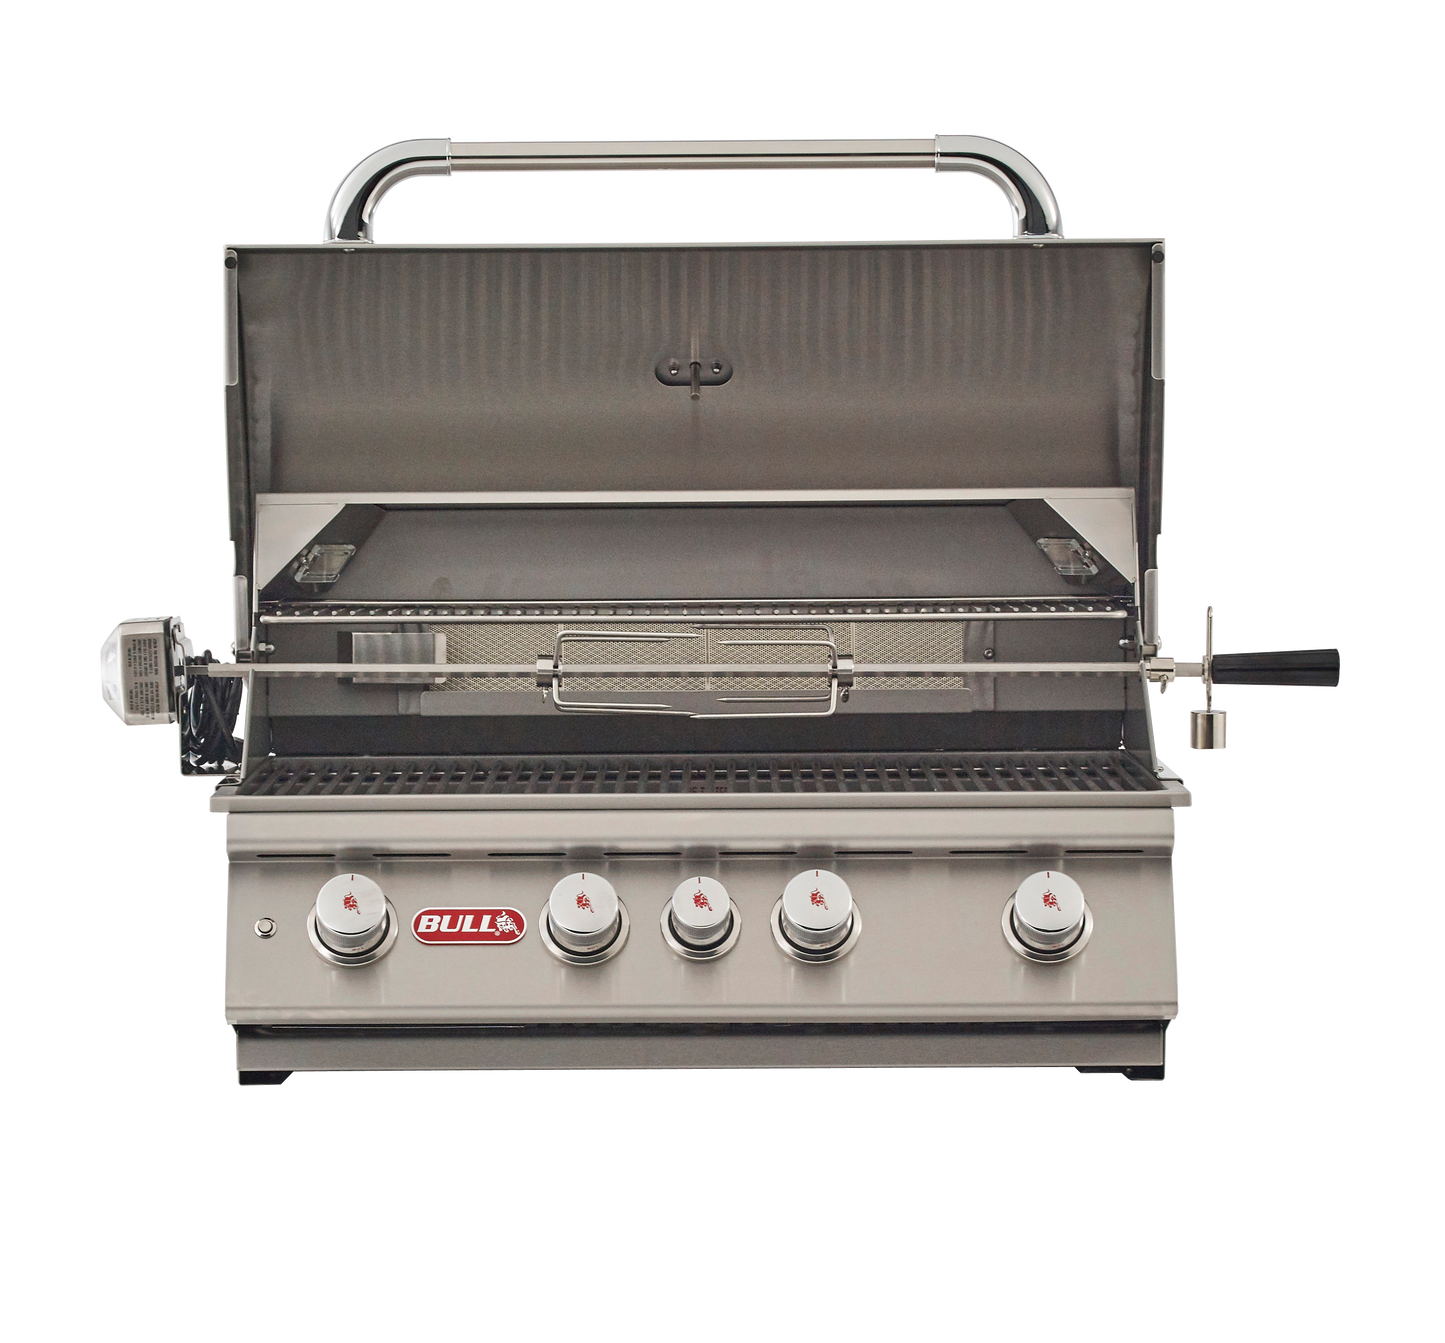 Bull Angus Built-In Grill With Lights, Rotisserie & Rear Burner